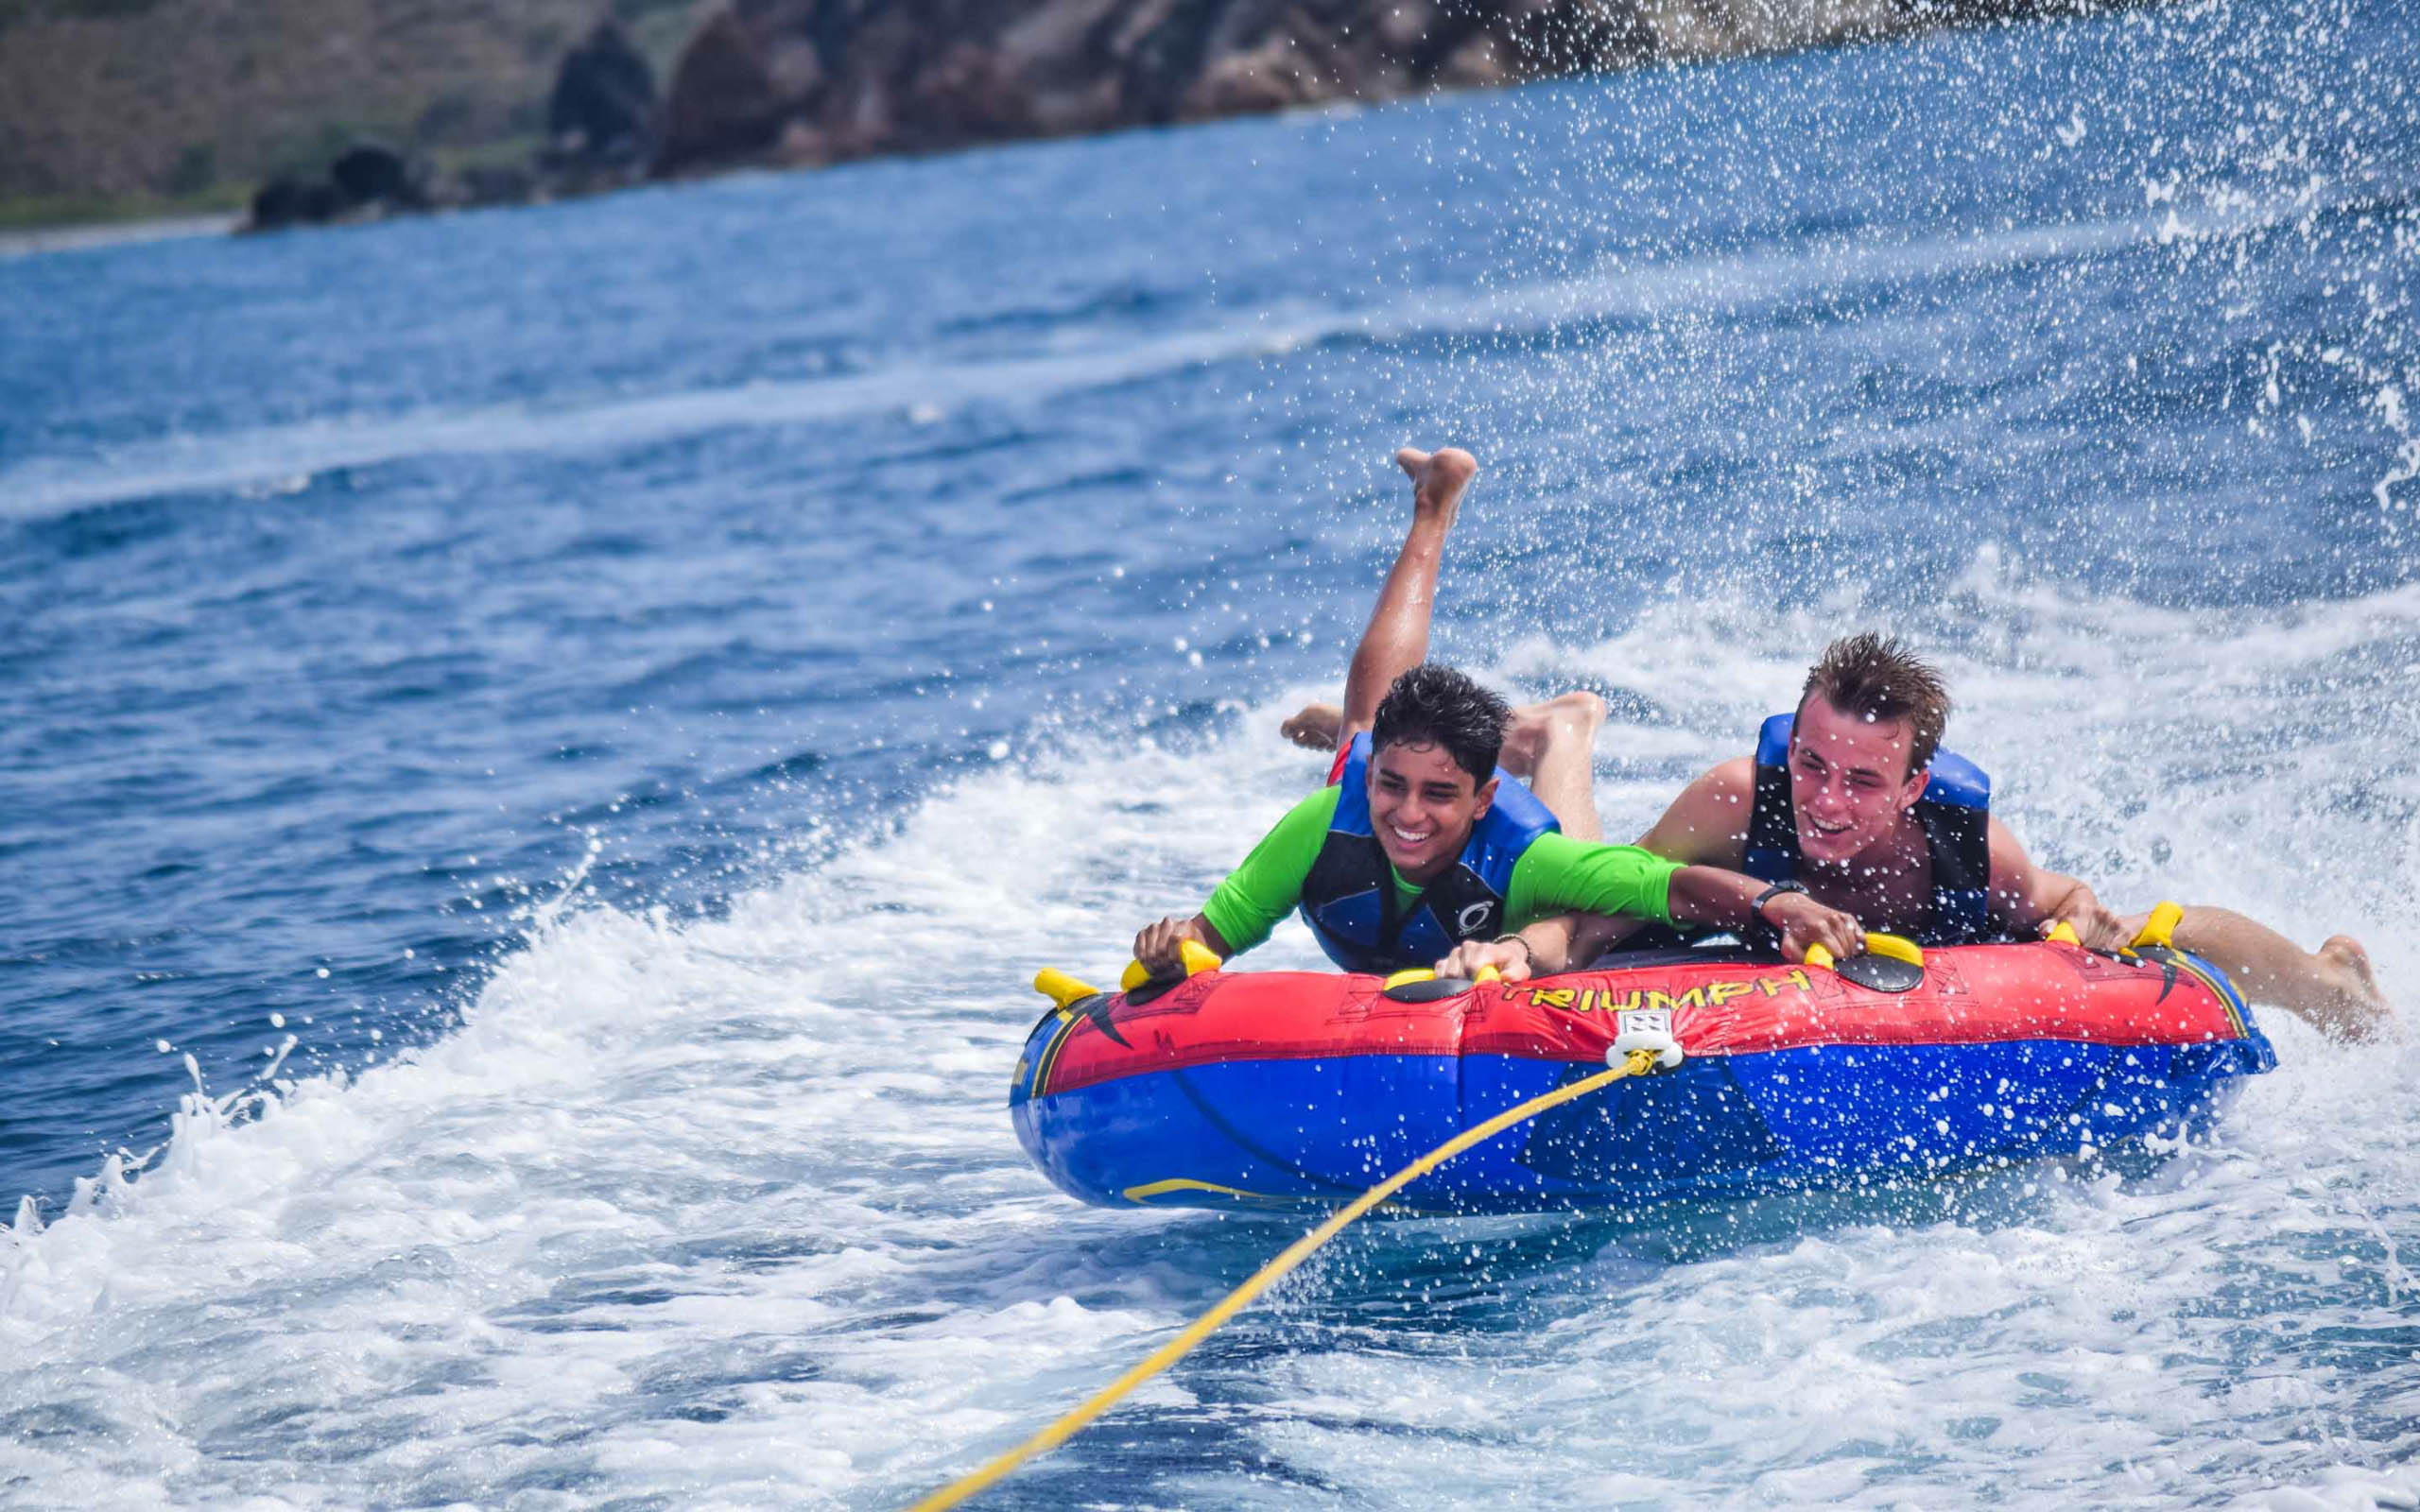 Two people riding on a water tube in the ocean.